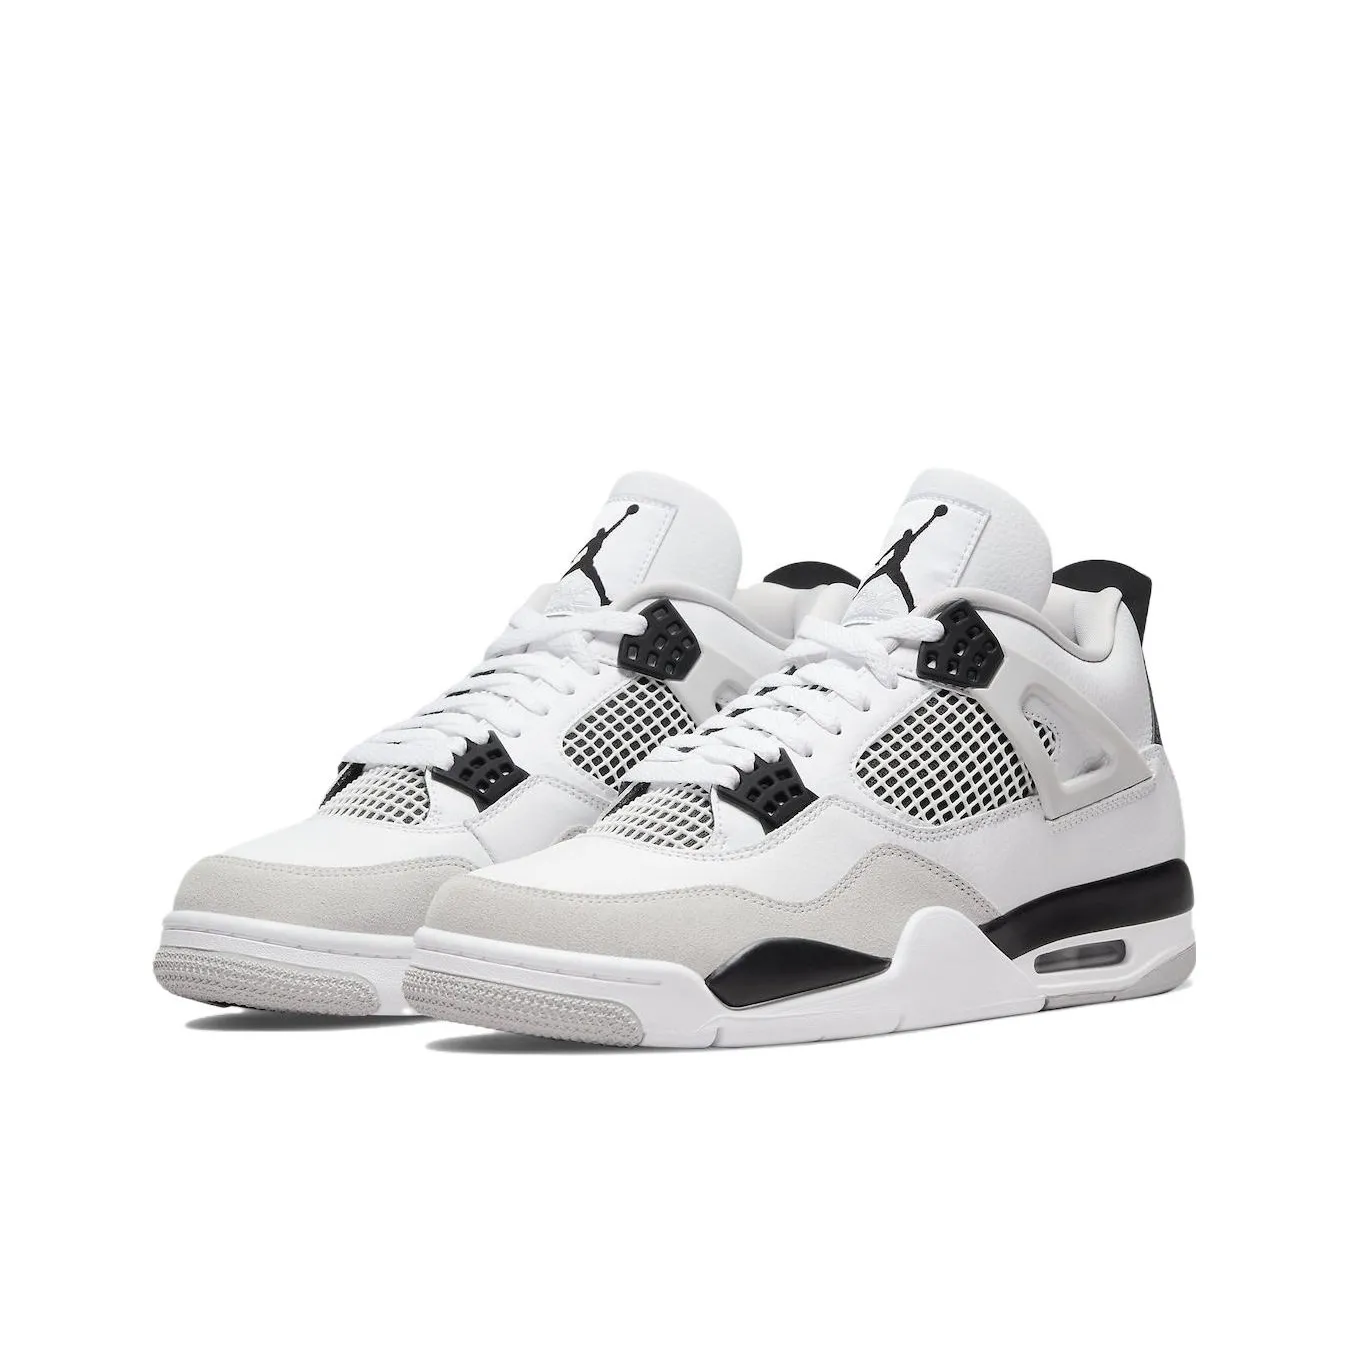 Air Jordan 4 Retro “Military Black” ✅Sizes 7.5-14 Available And Ready To  Ship✅